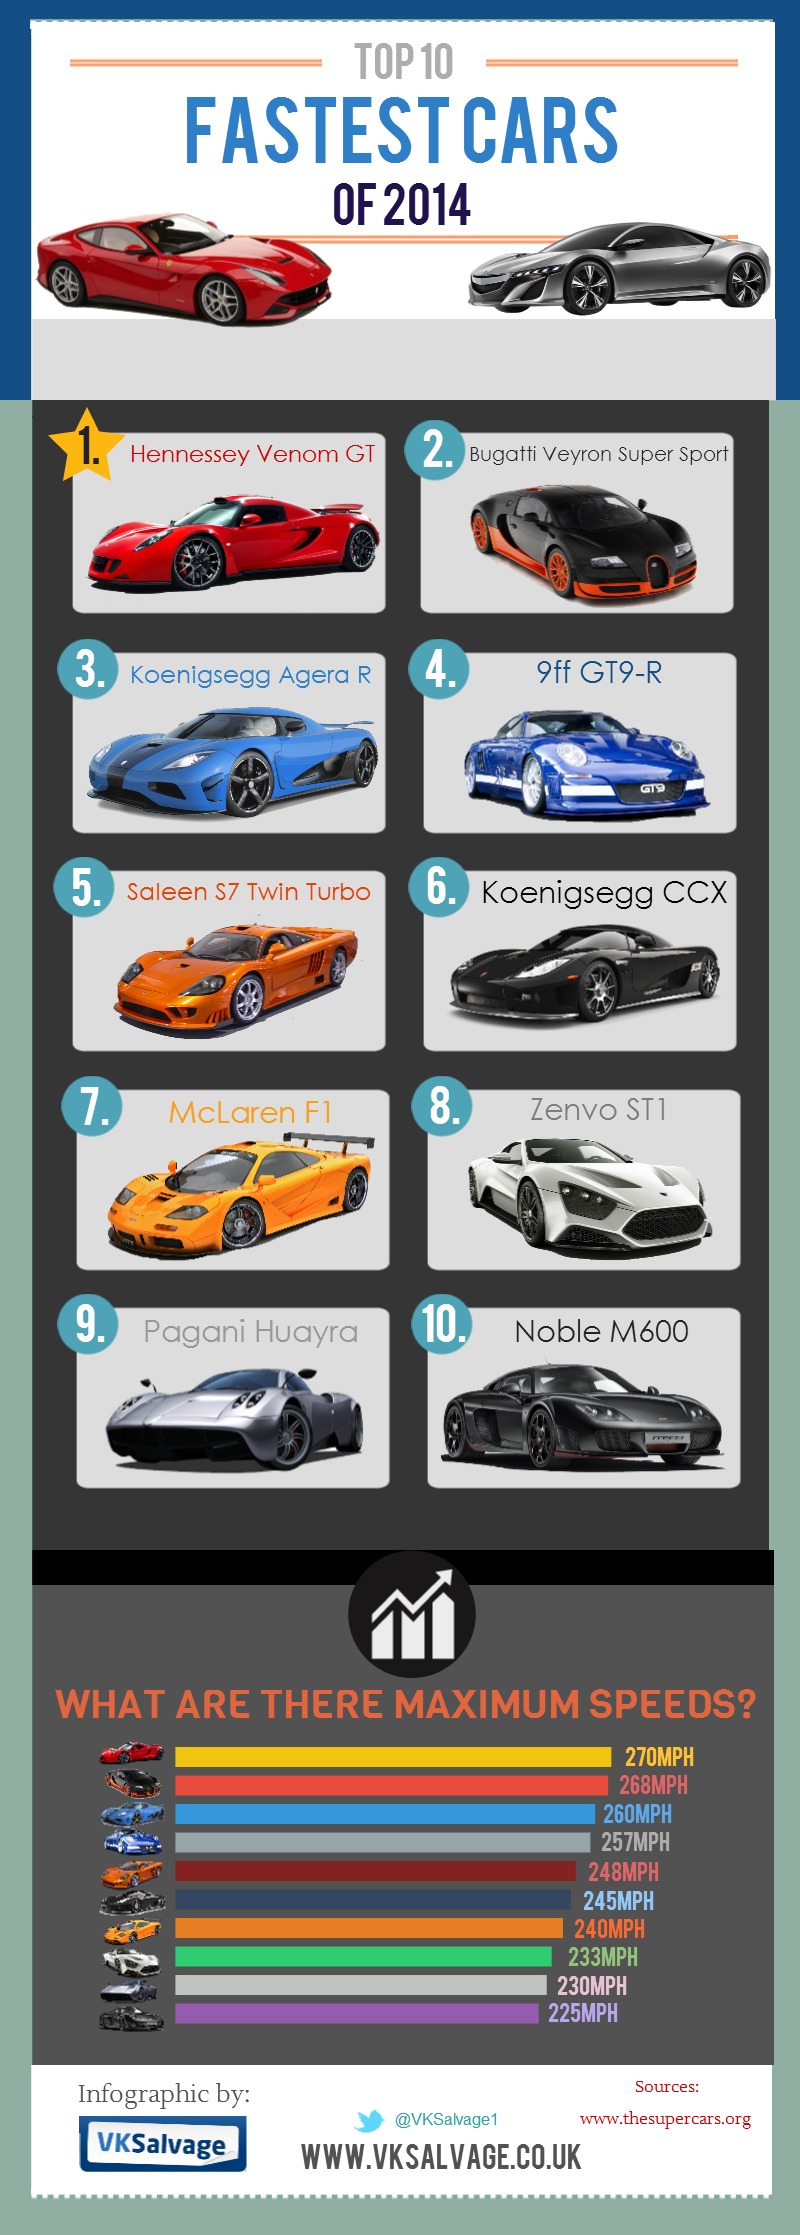 Worlds 10 Fastest Cars 2014 | Visual.ly